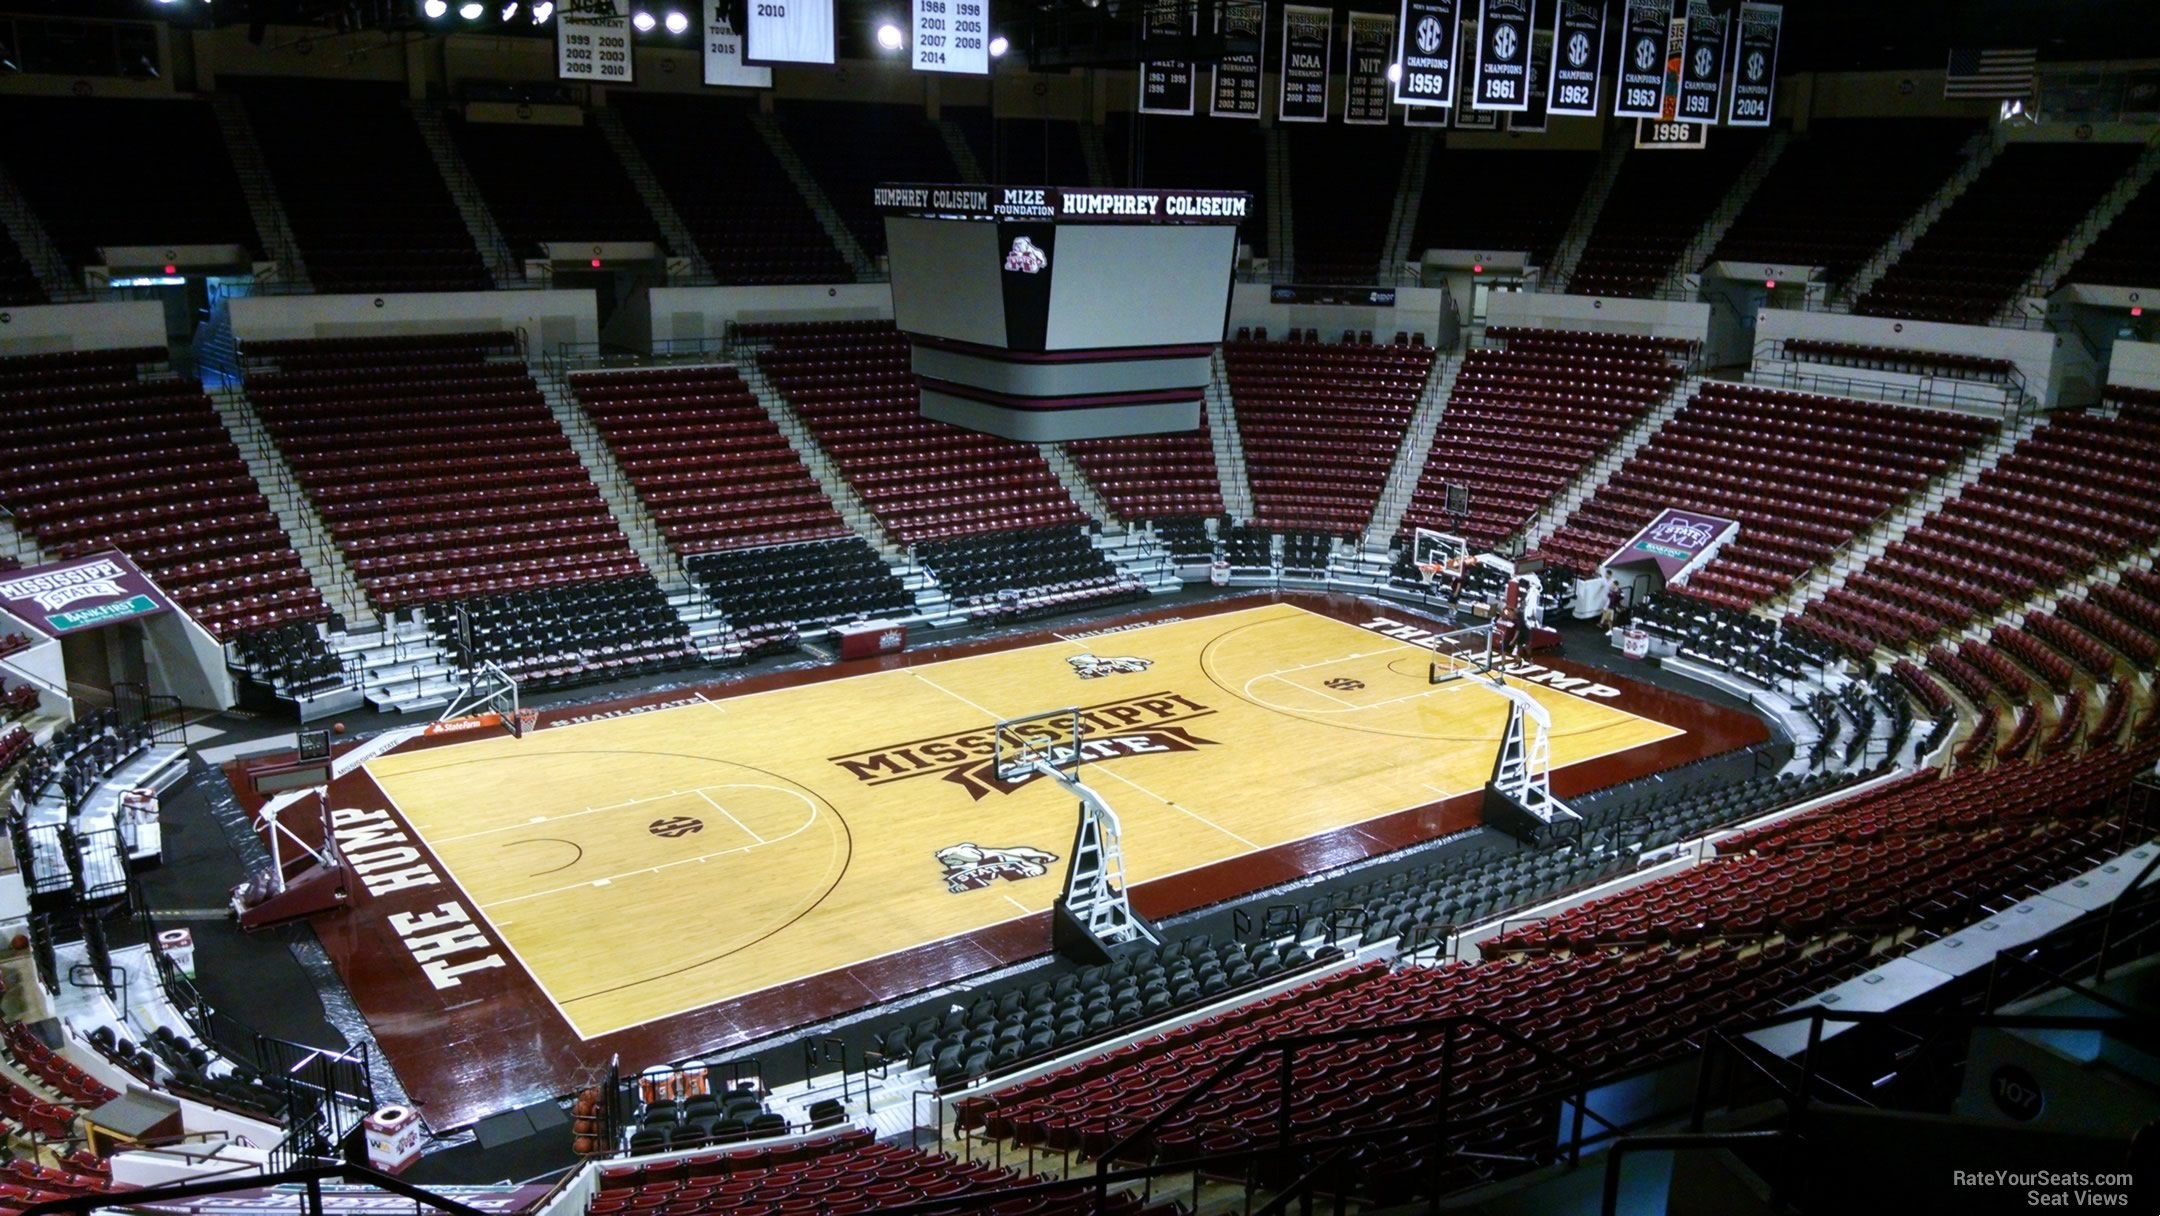 section 213, row 8 seat view  - humphrey coliseum